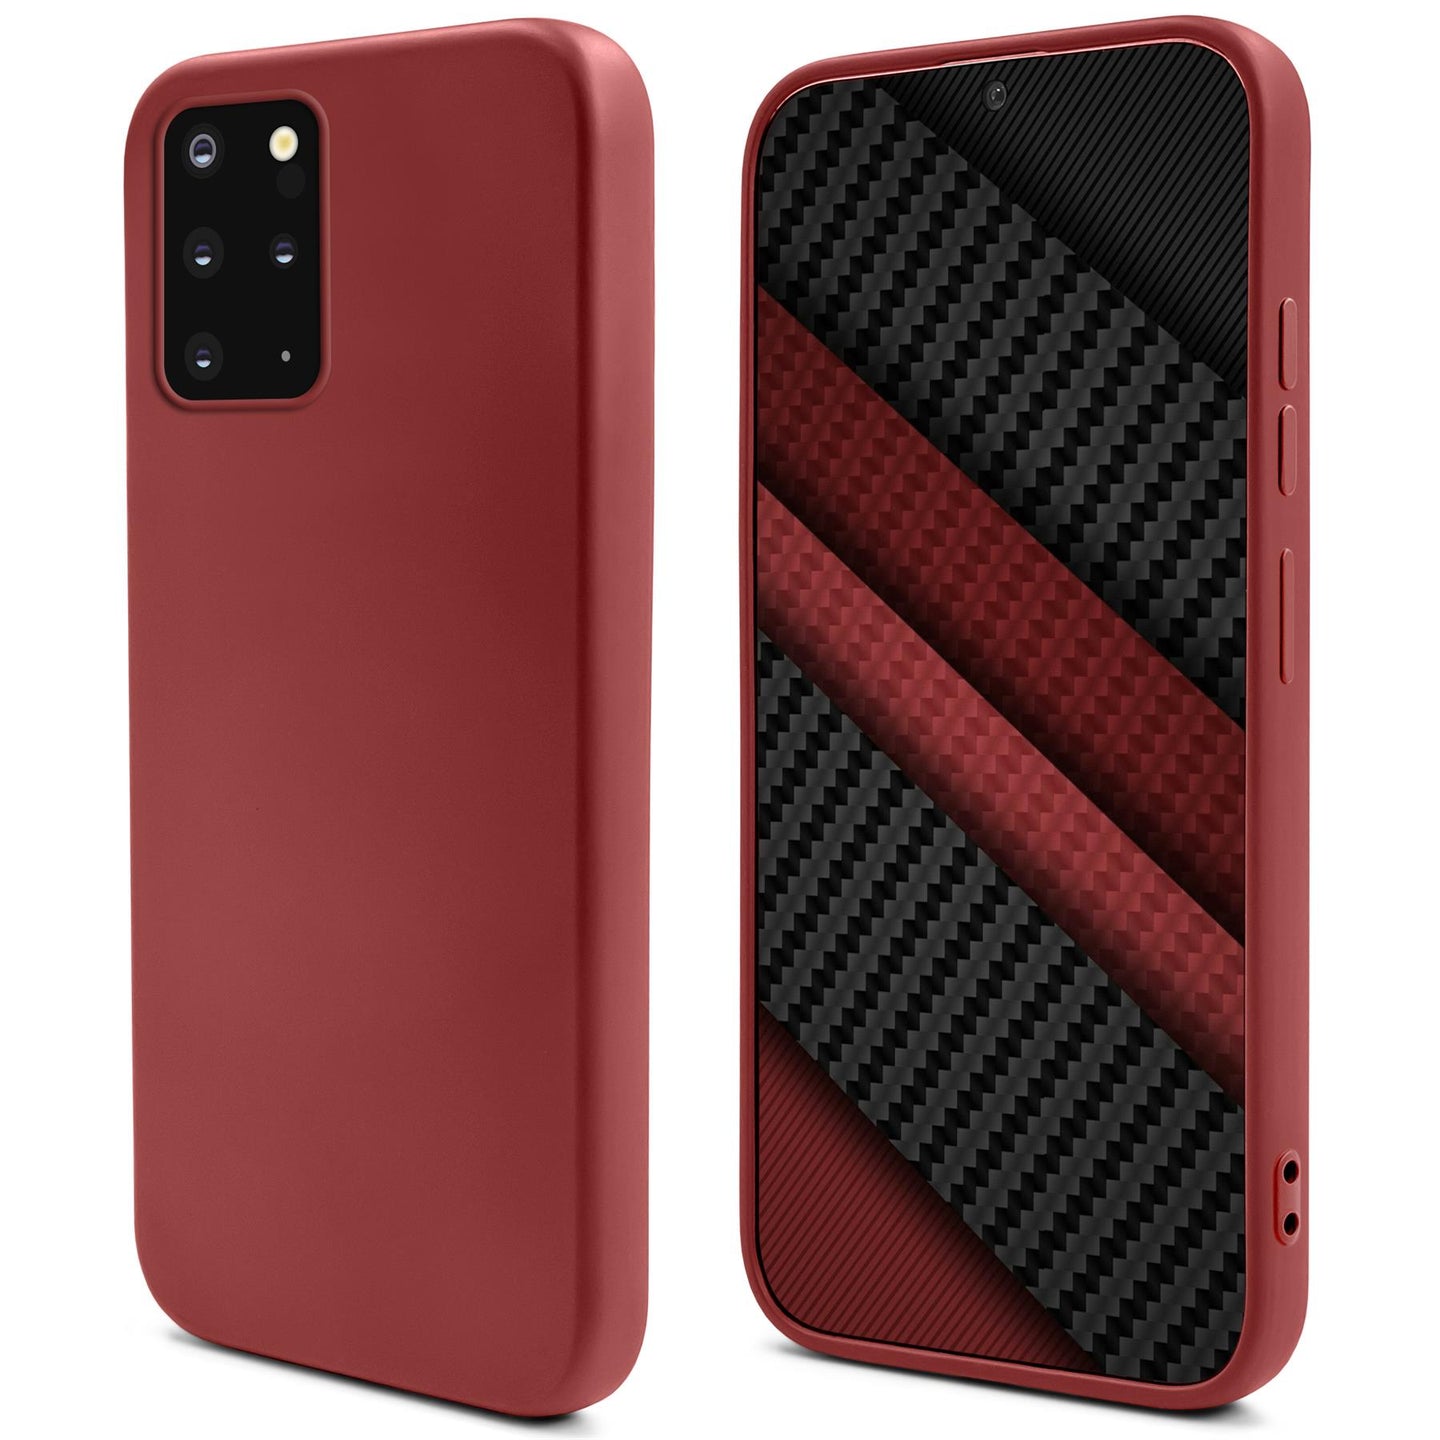 Moozy Lifestyle. Silicone Case for Samsung S20 Plus, Vintage Pink - Liquid Silicone Lightweight Cover with Matte Finish and Soft Microfiber Lining, Premium Silicone Case